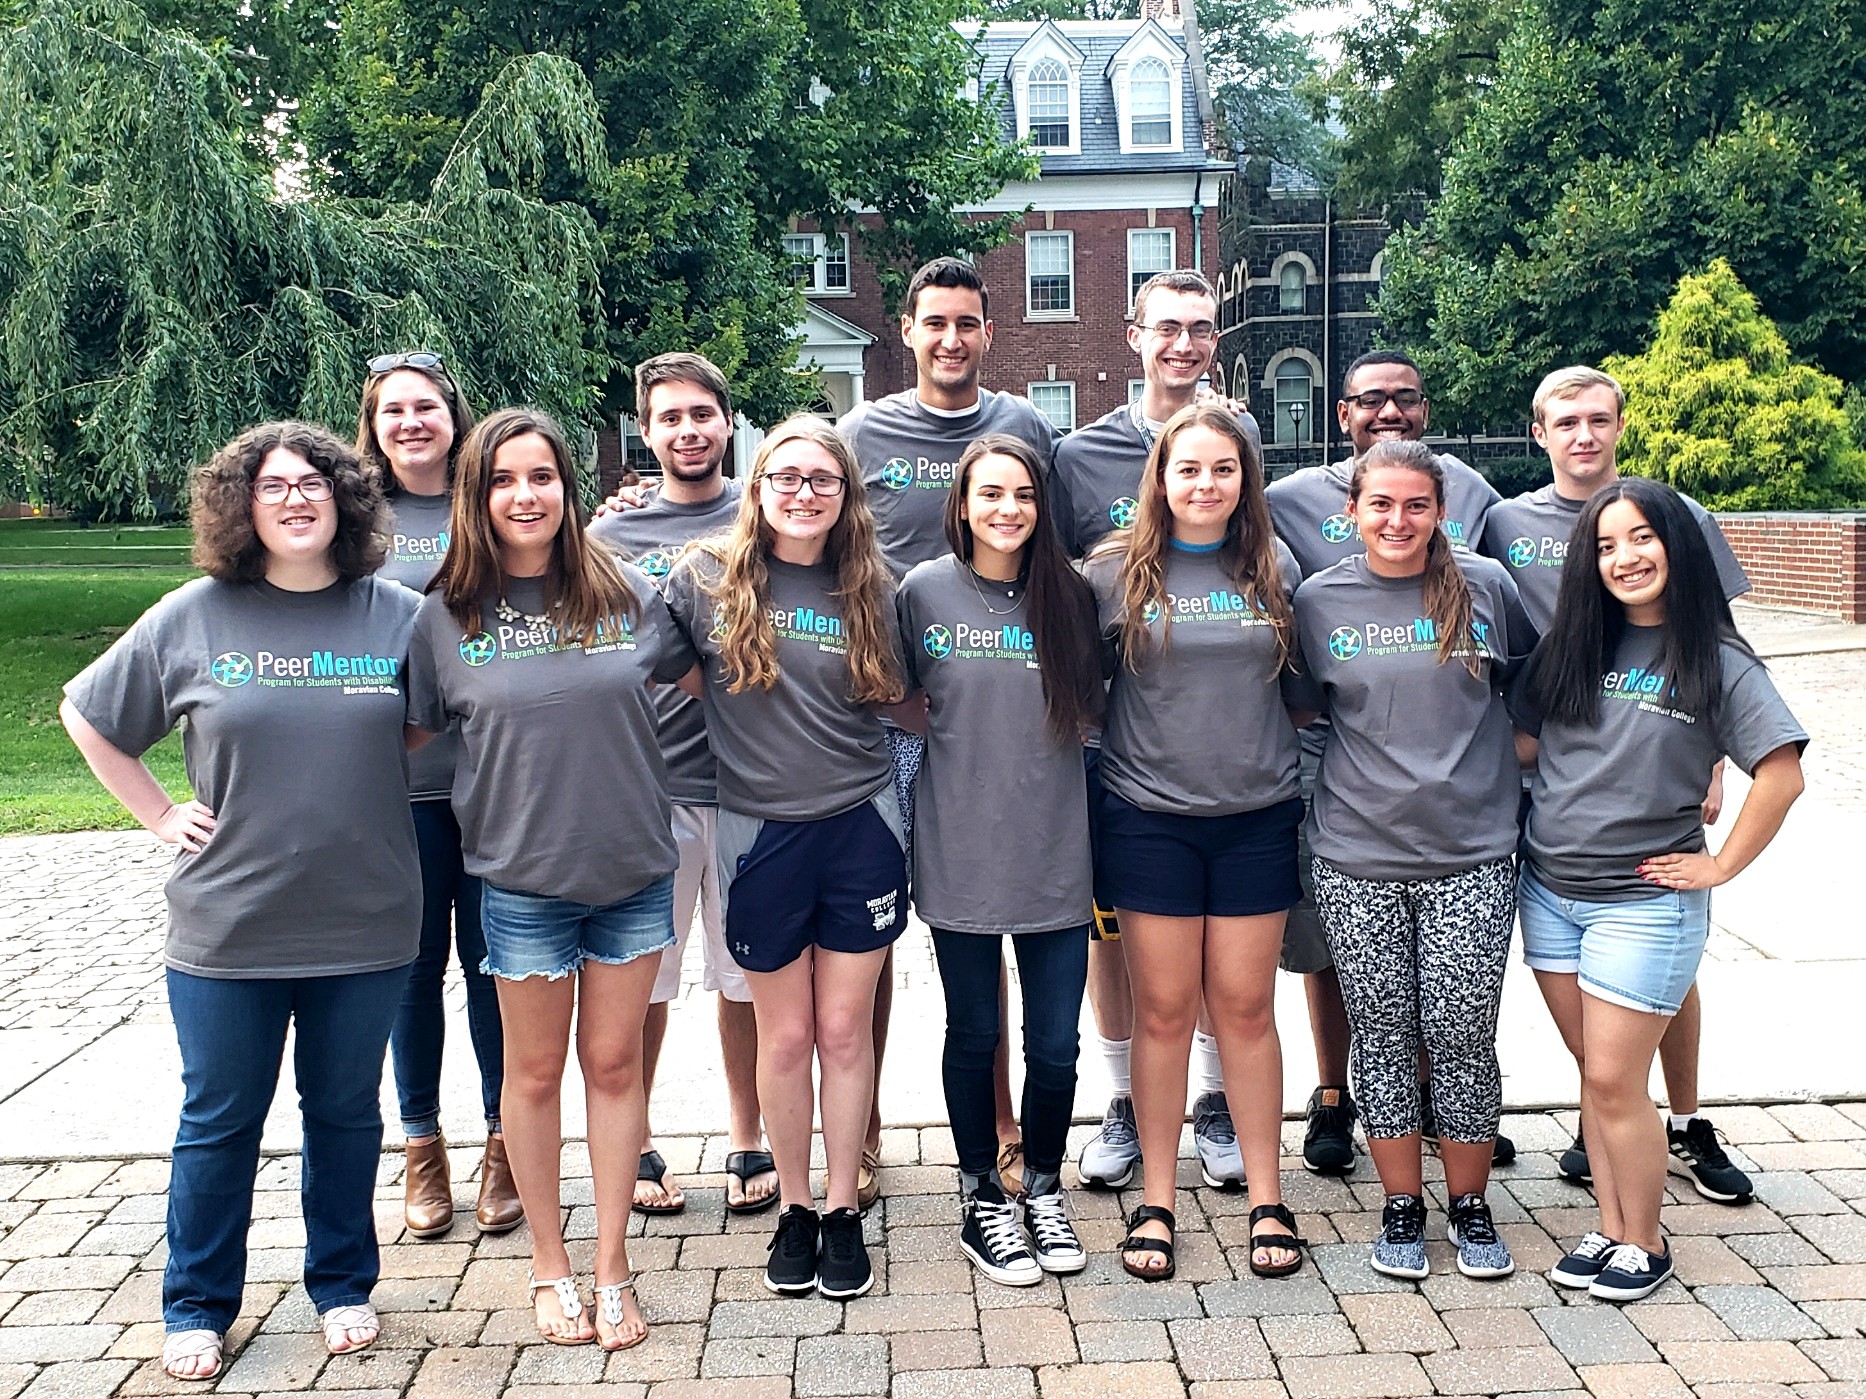 A group of 13 students wearing matching grey t-shirts stand outside posed for a group photo. Their t-shirts read "Peer Mentor Program for Students with Disabilities, Moravian University"